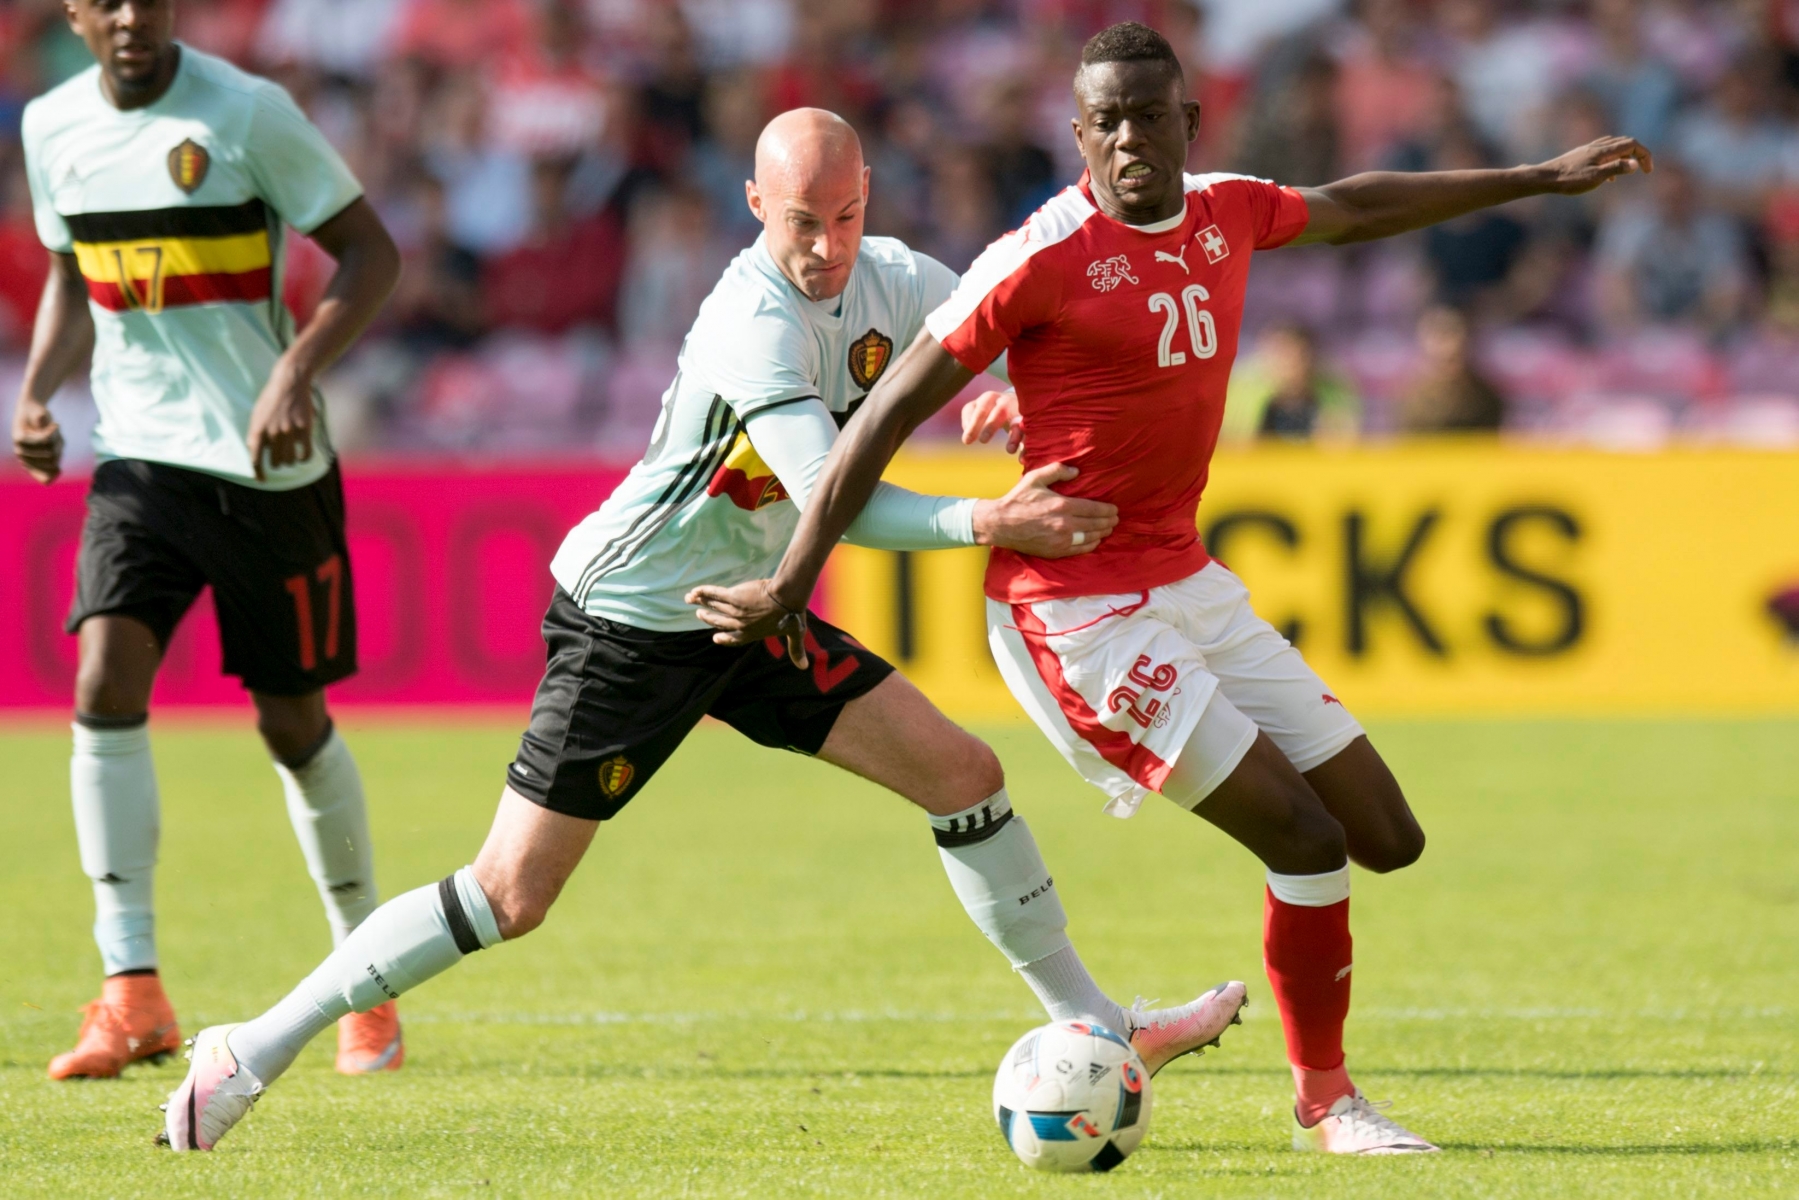 Belgian Laurent Caiman, left, fights for the ball with Swiss forward Denis Zakaria, right, during an international friendly test match between the national soccer teams Switzerland and Belgium, at the stade de Geneve stadium, in Geneva, Switzerland, Saturday, May 28, 2016. Switzerland and Belgium national soccer teams prepare for the UEFA Euro 2016 that will take place from June 10 to July 10, 2016 in France. (KEYSTONE/Laurent Gillieron) SWITZERLAND EURO 2016 TEST MATCH CHE BEL